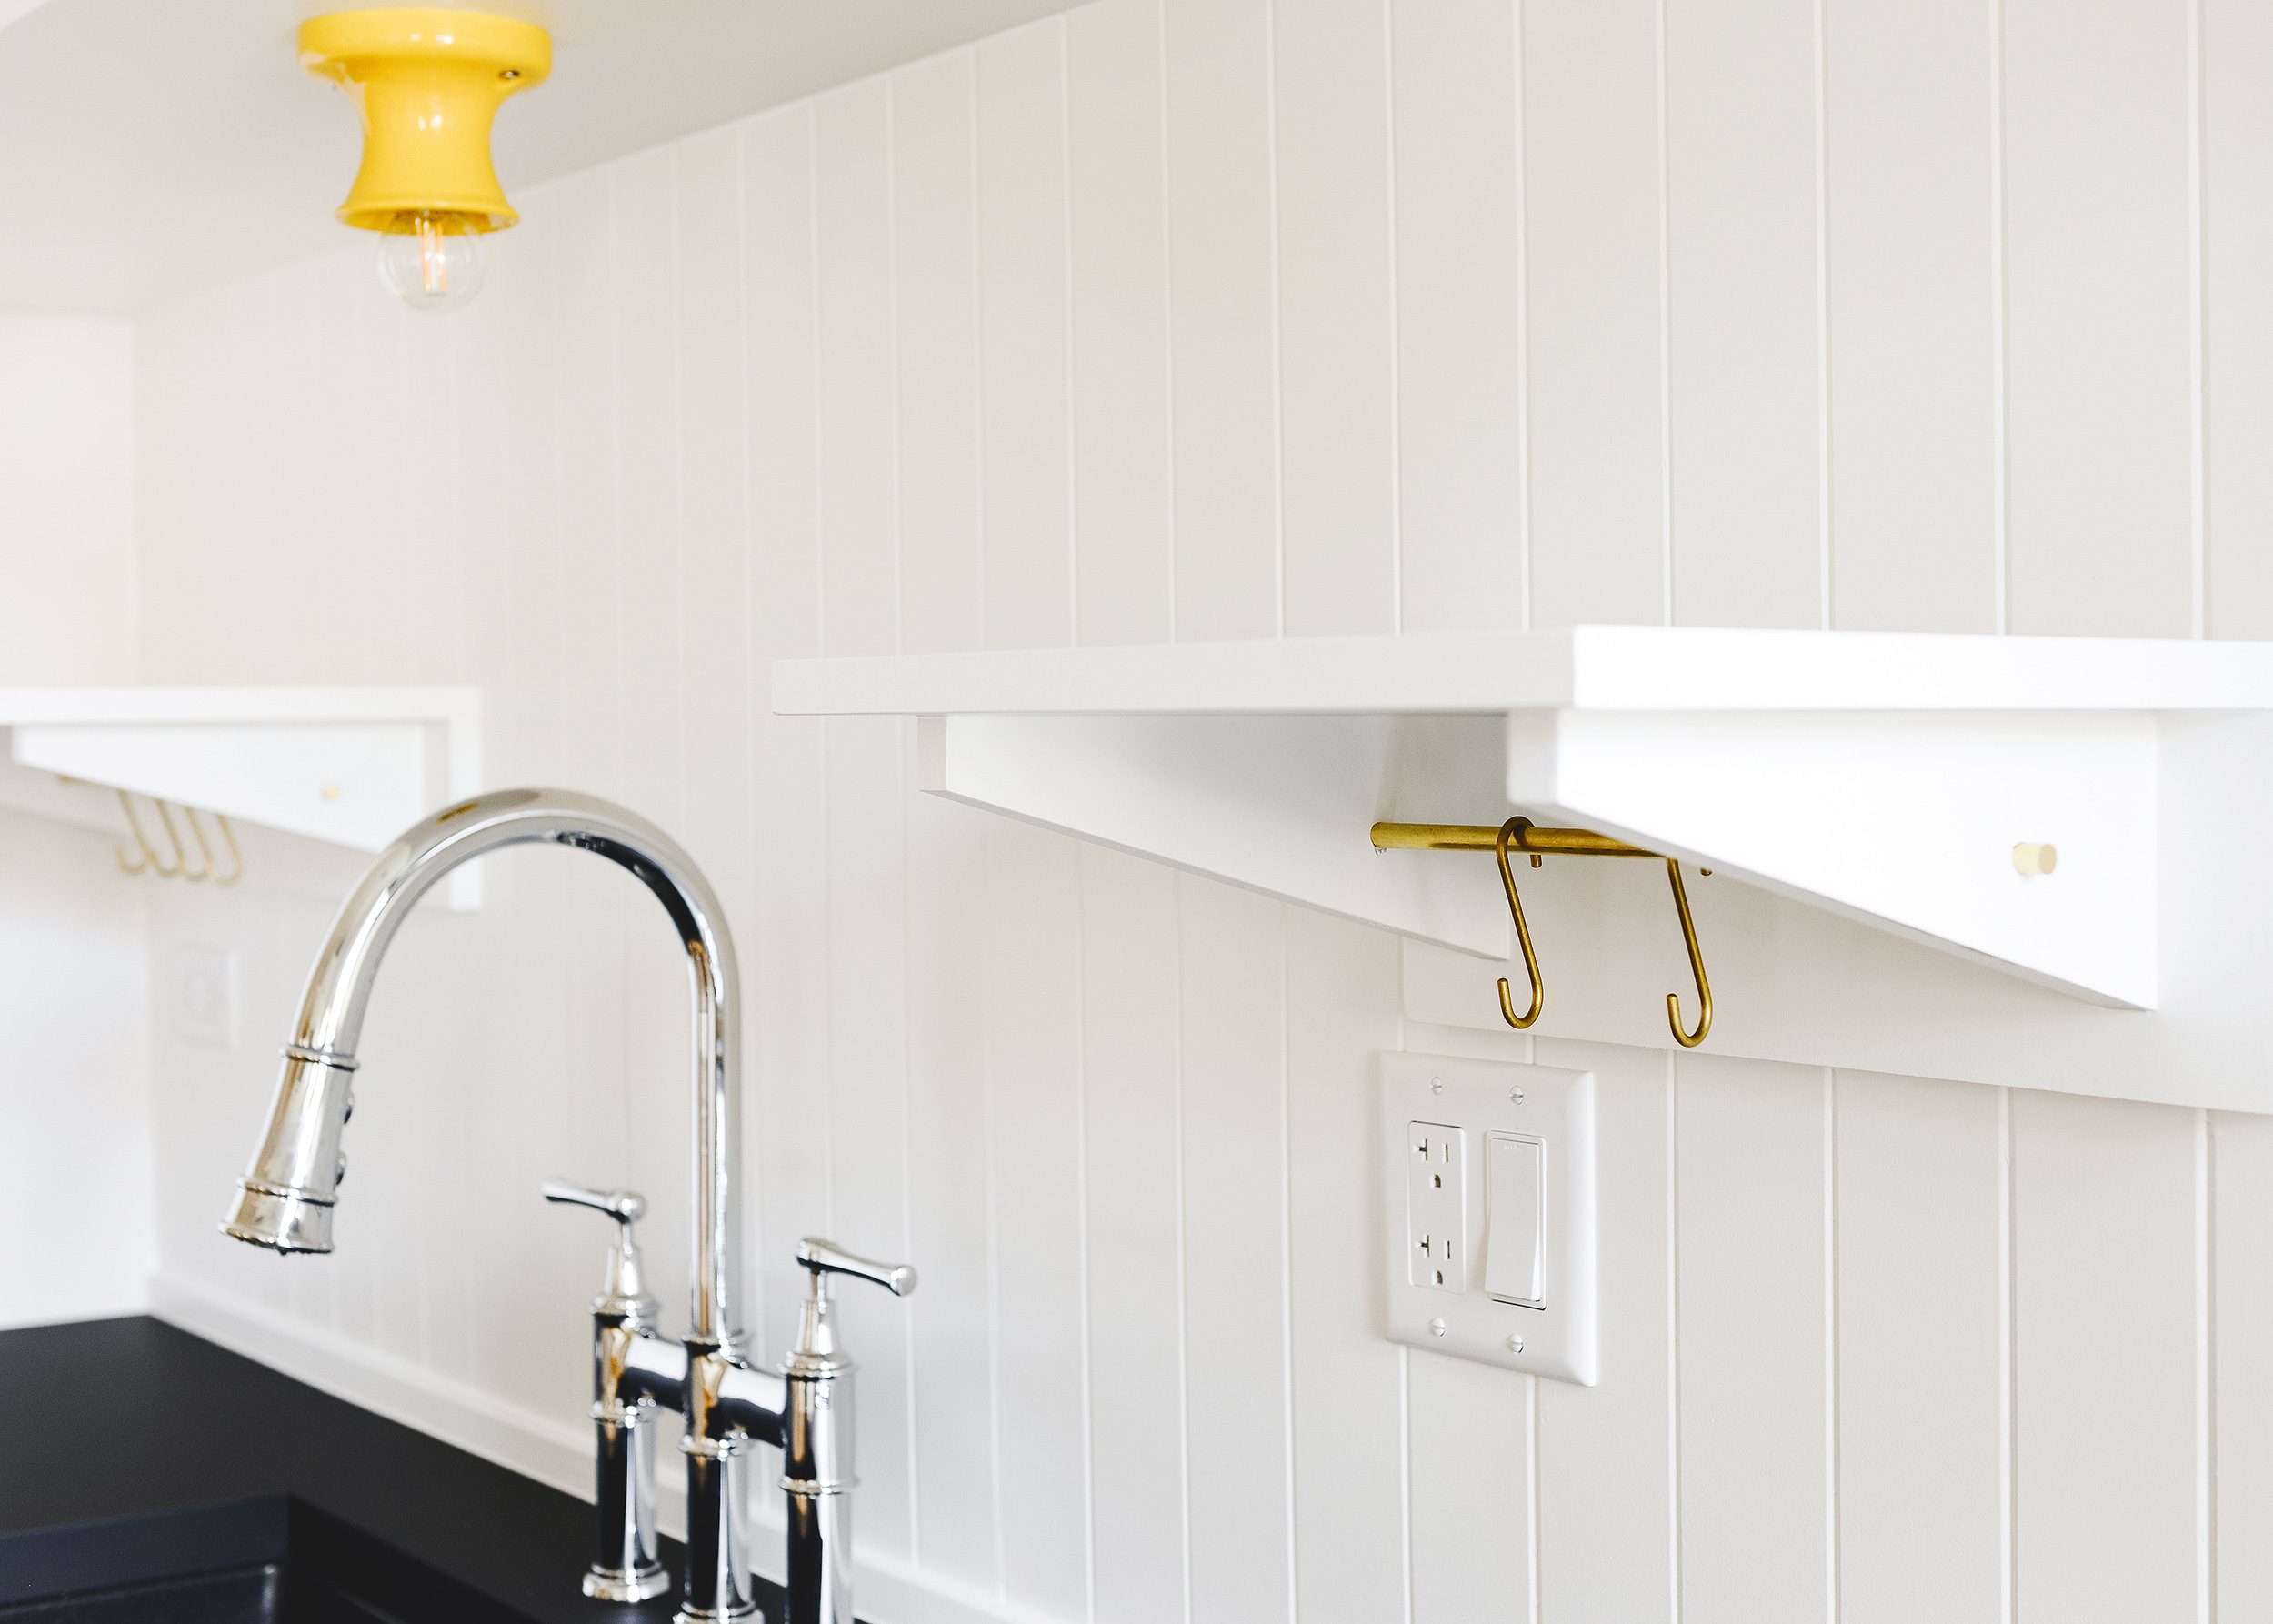 A pair of custom white floating shelves with integrated brass rods and 'S' hooks are flanked by a chrome bridge faucet below and a yellow ceramic sconce above